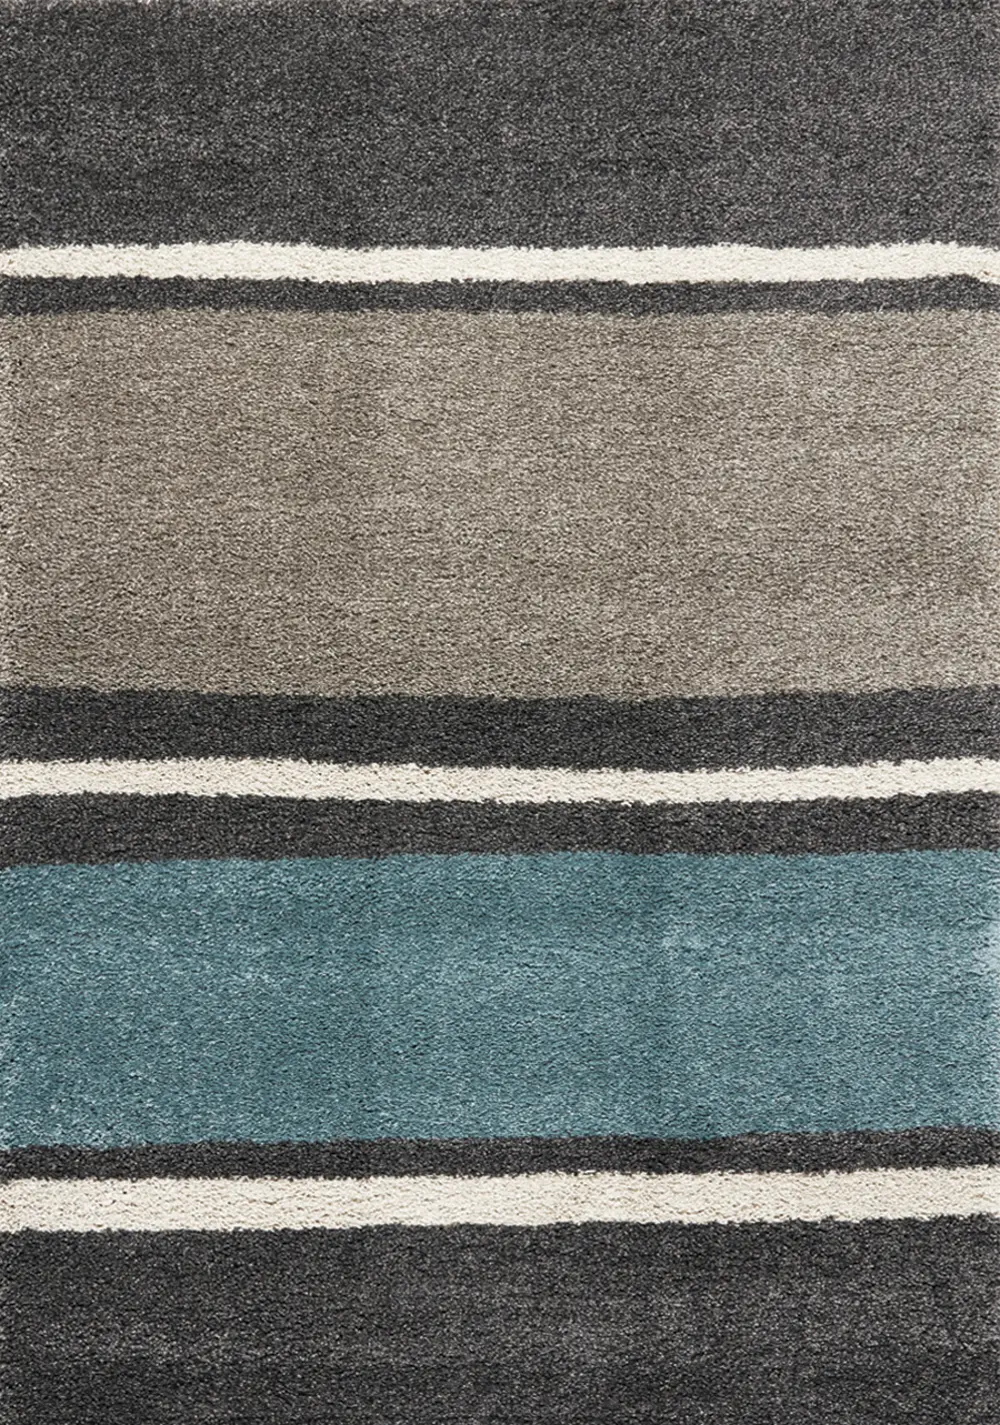 7 x 10 Large Striped Gray, Taupe and Teal Blue Rug - Maroq-1